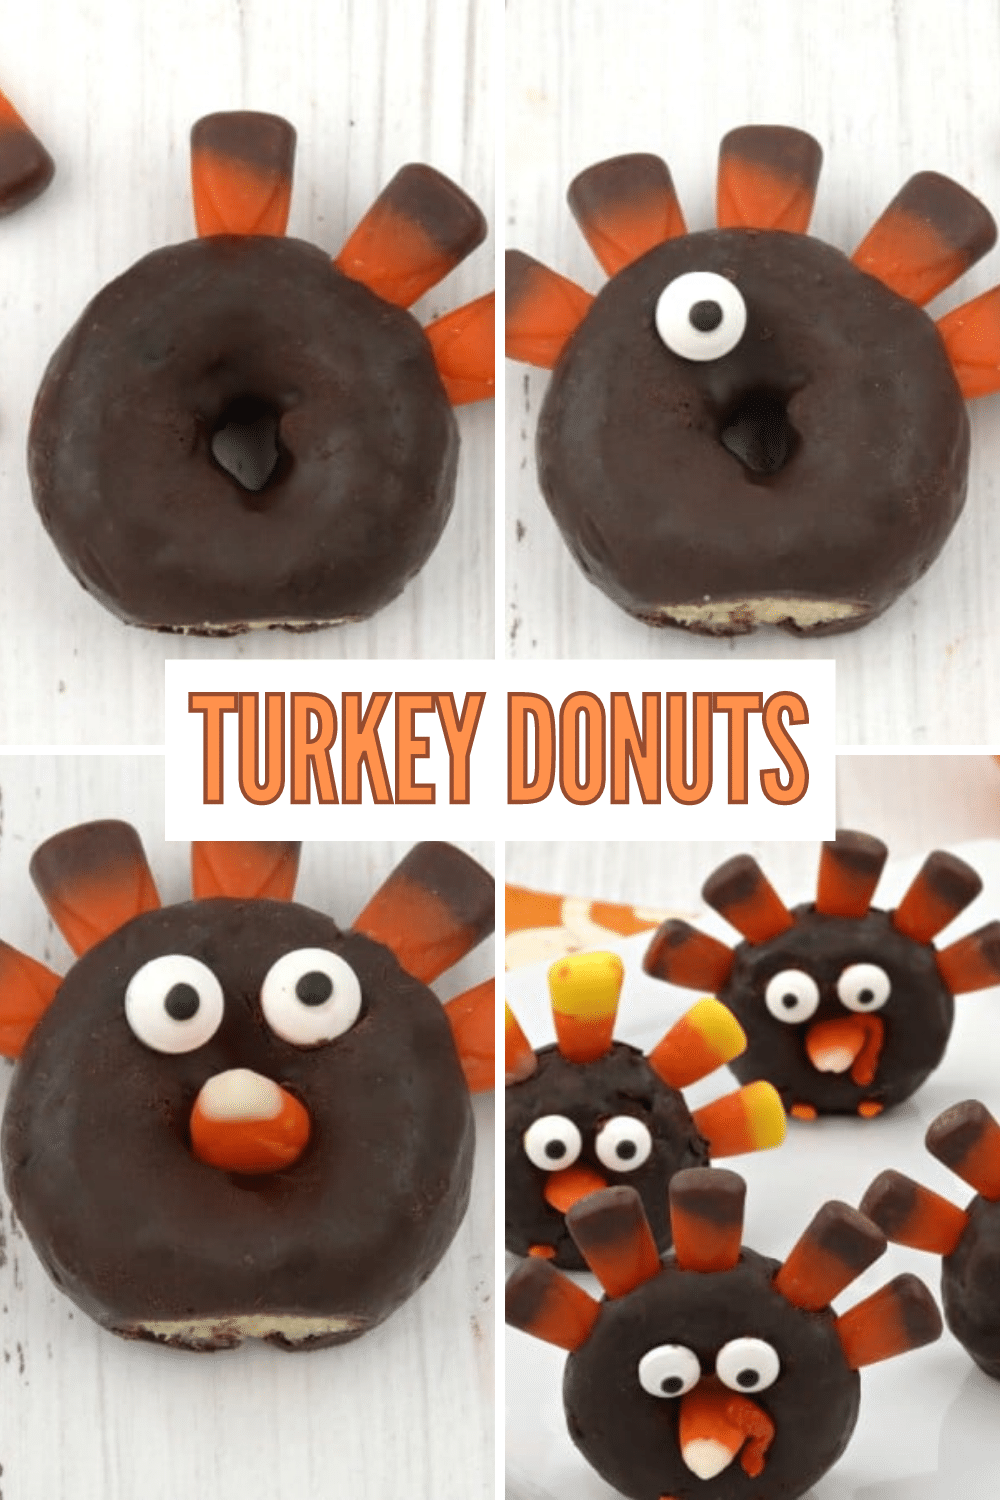 These mini donut turkeys are an adorable Thanksgiving treat and they're super easy to make! #Thanksgiving #funfood via @wondermomwannab